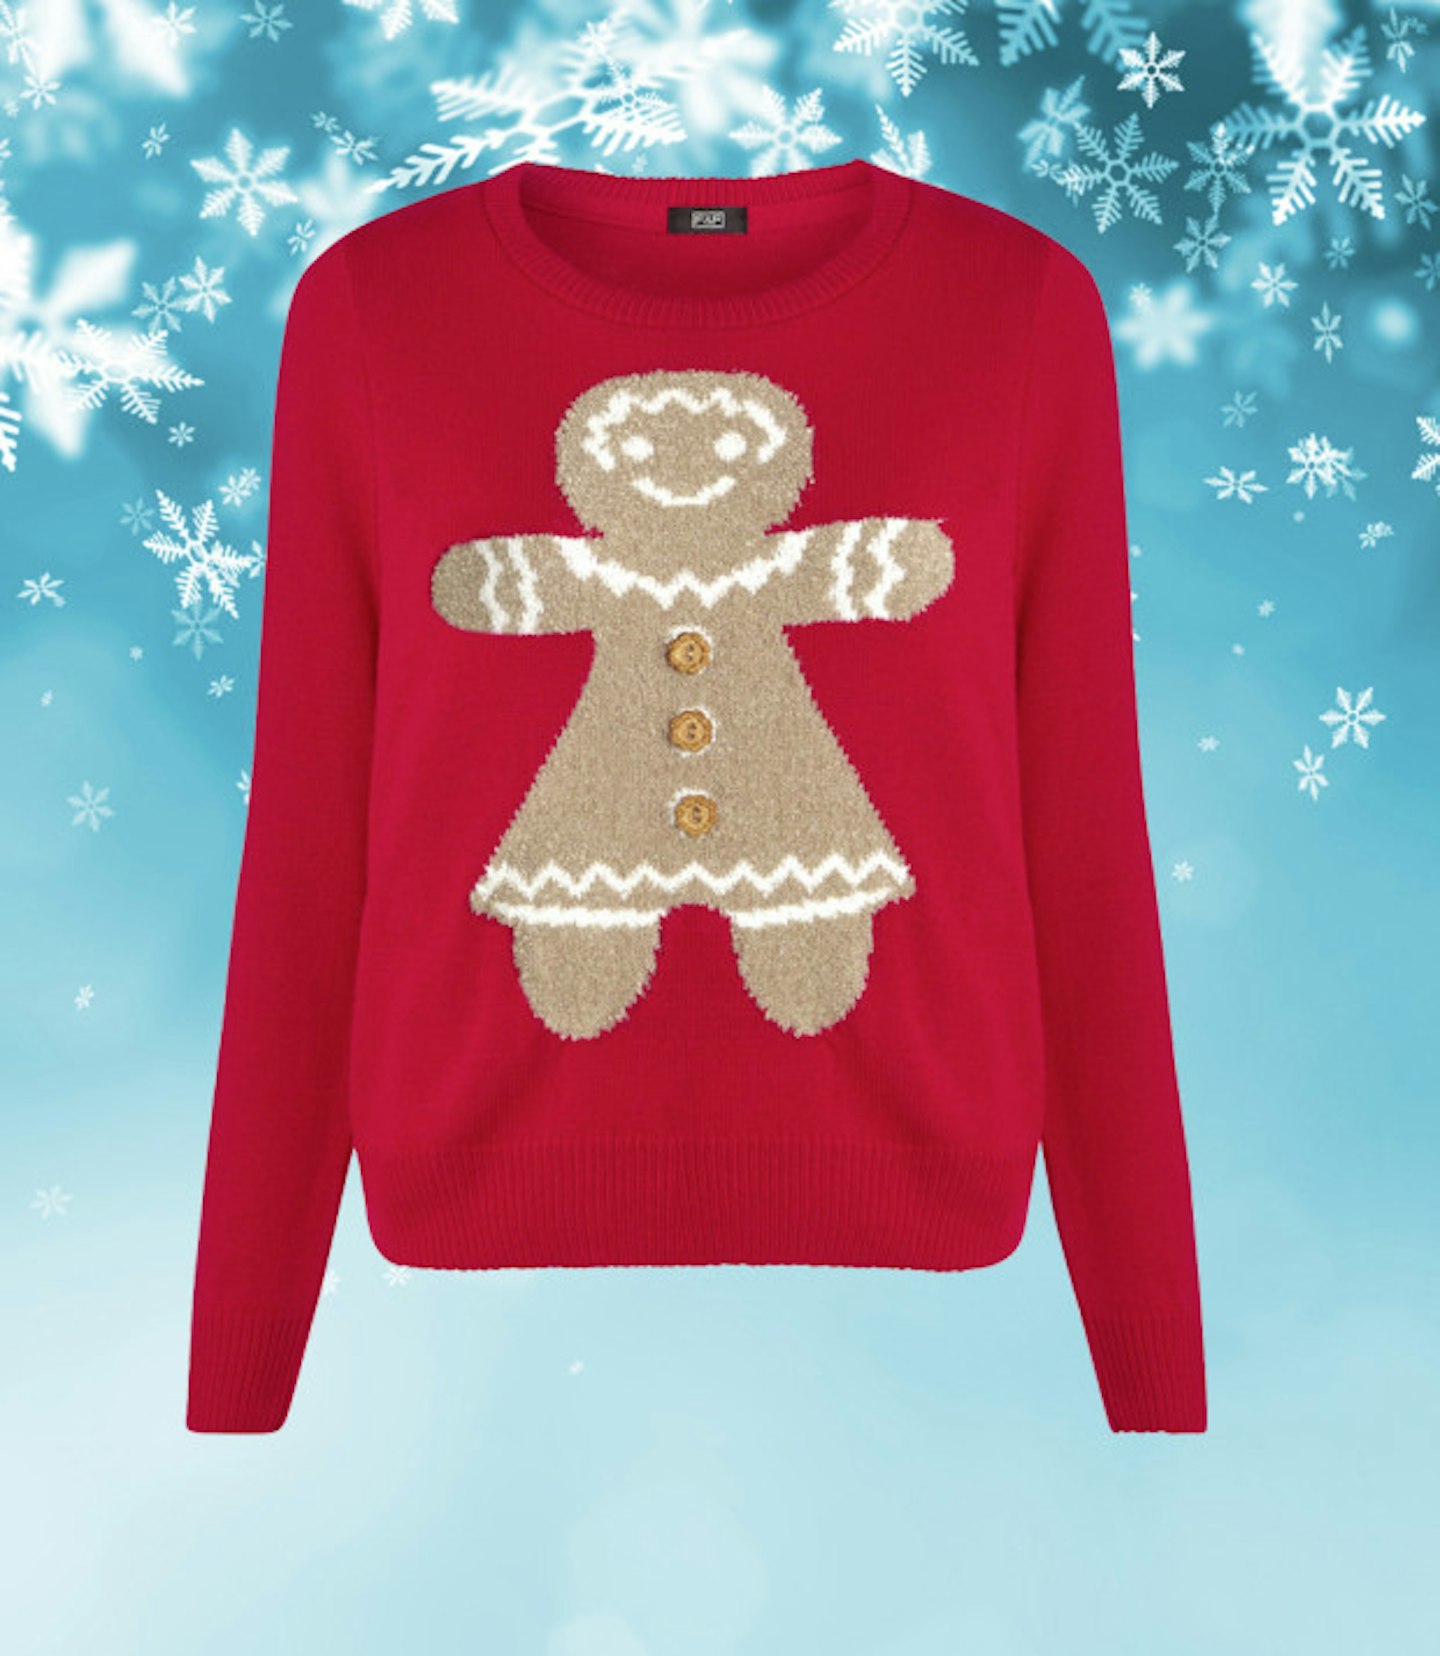 christmas-jumpers-f&f-tesco-gingerbread-man-red